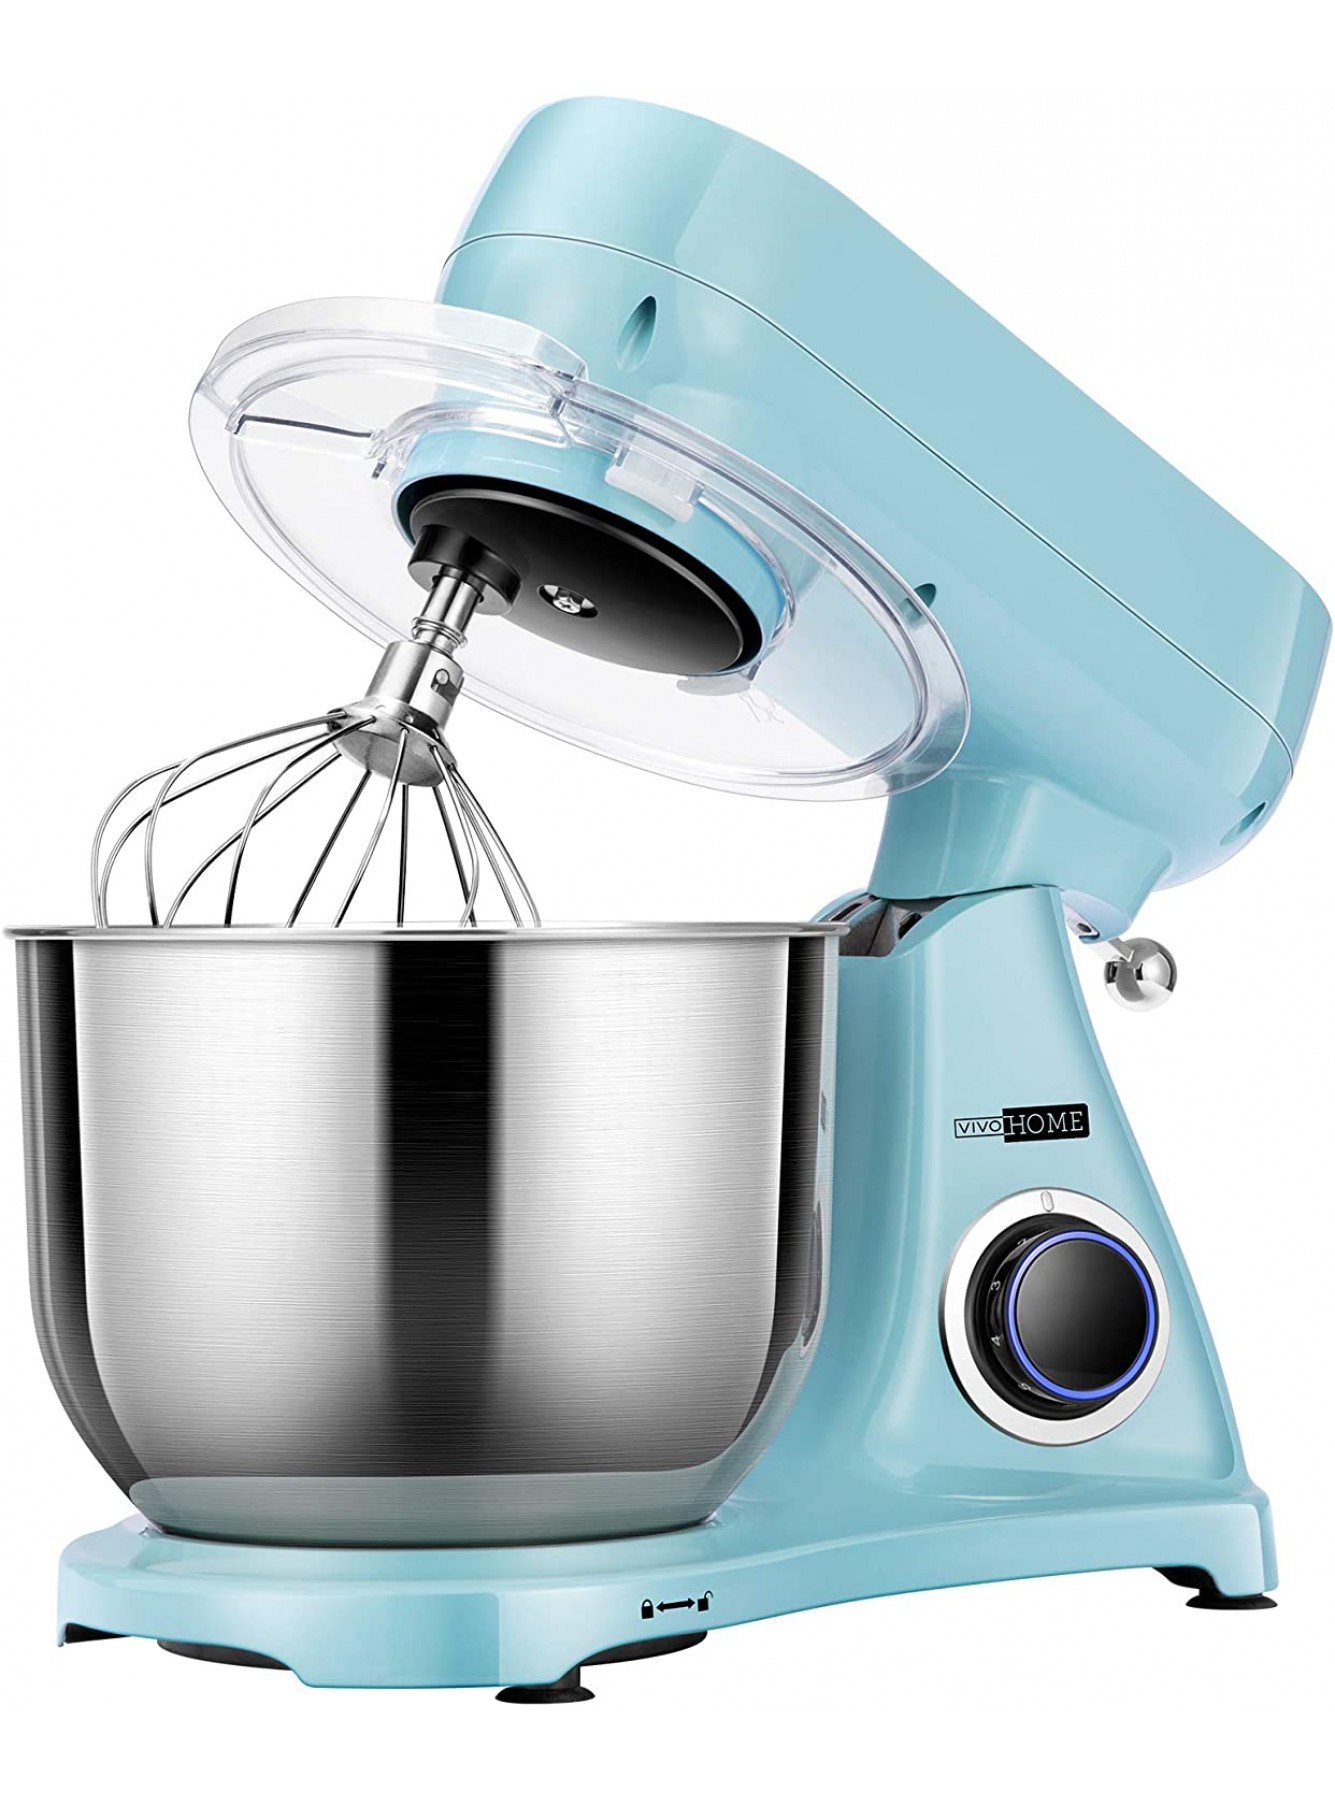 VIVOHOME 6.7 Quart 800W Stand Mixer with All-metal Housing 6-Speed Tilt-Head Electric Food Mixer with Cast Aluminum Beater Dough Hook and Whisk Blue MET Listed B08DY4XY9J